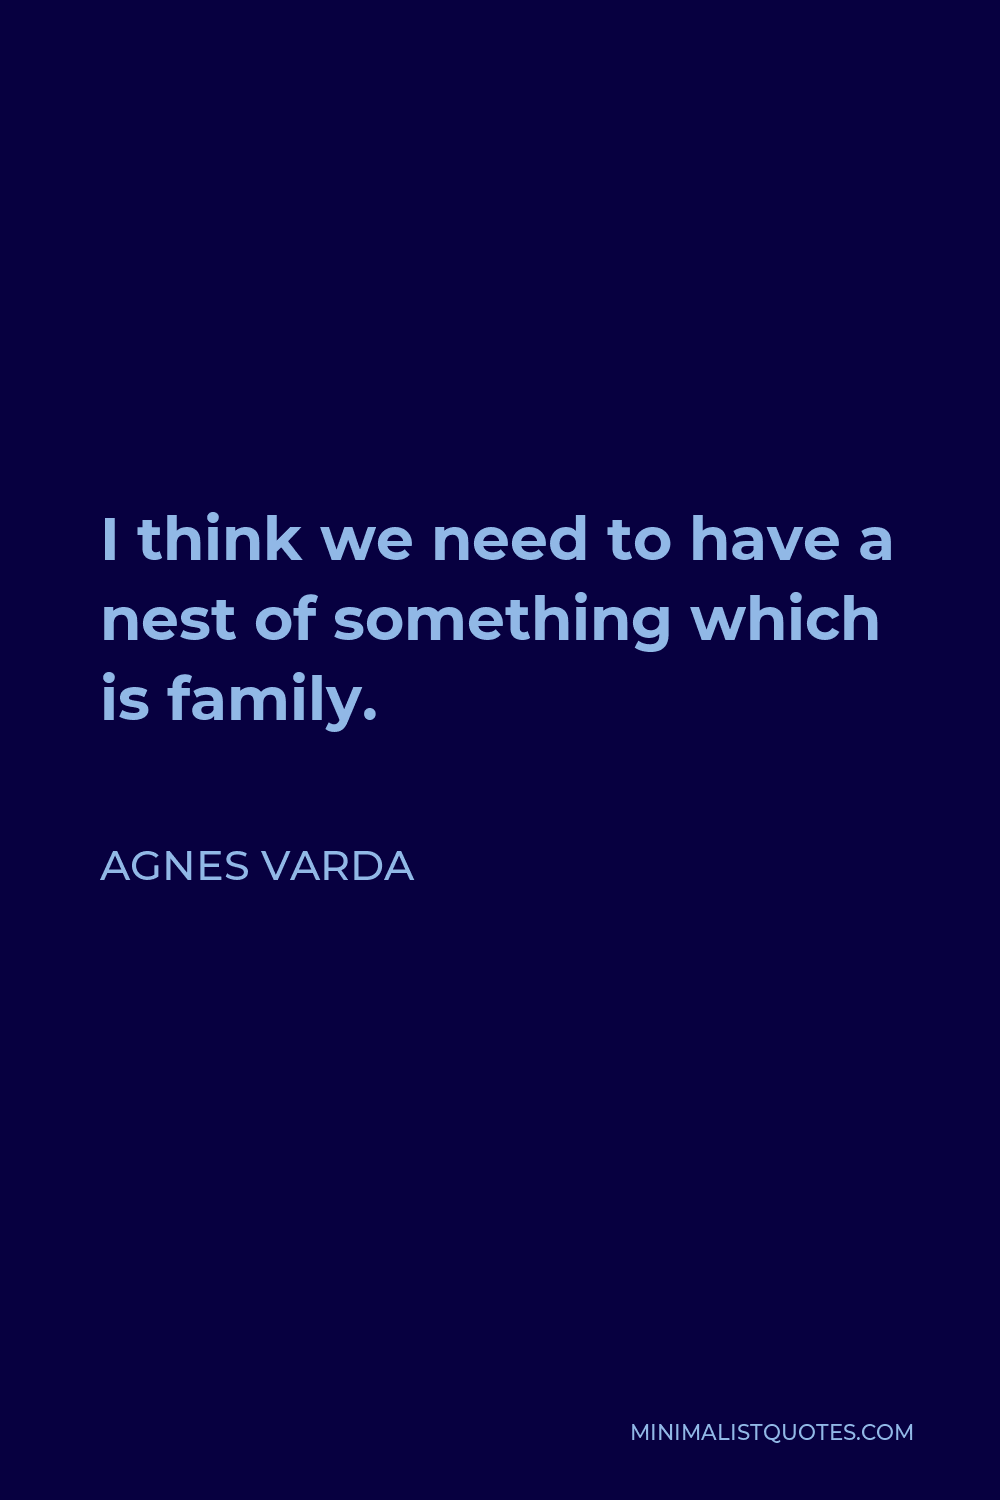 Agnes Varda Quote - I think we need to have a nest of something which is family.